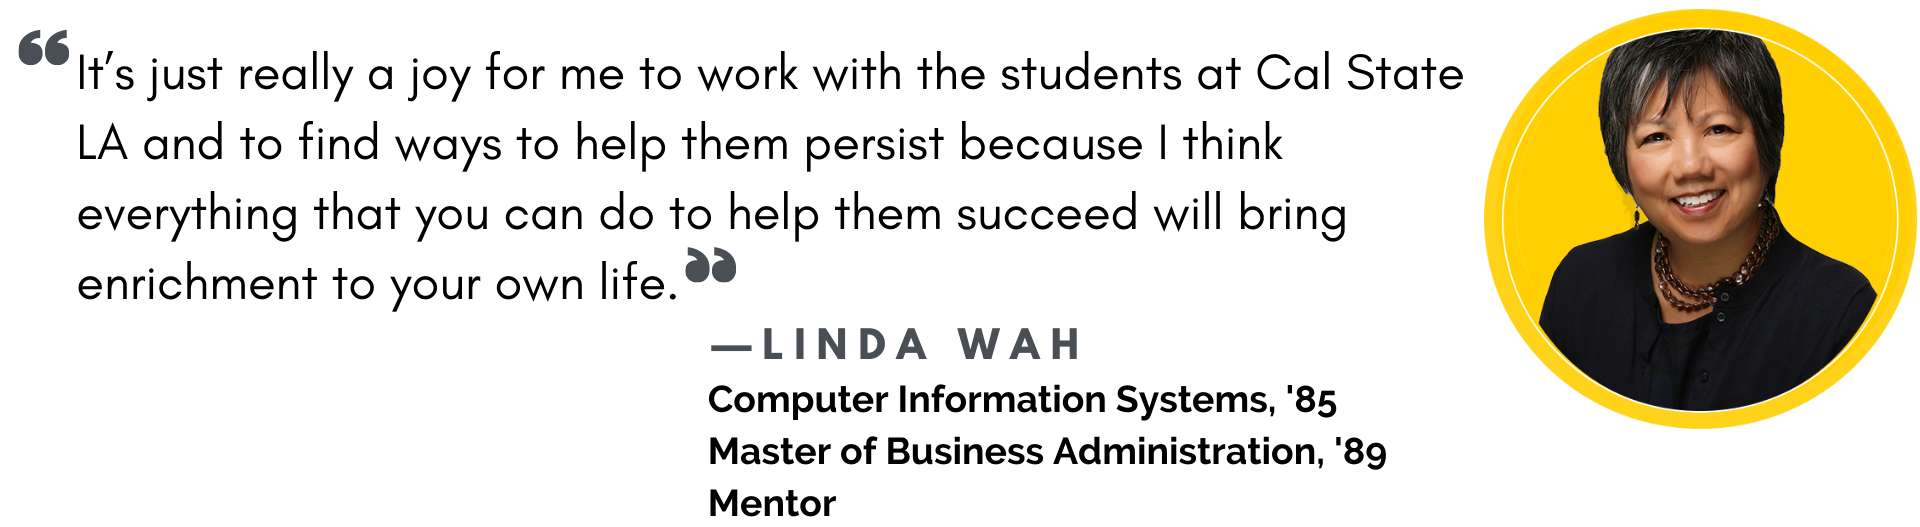 "It's really a joy for me to work with the students at Cal State LA and to find ways to help them persist because I think everything that you can do to help them succeed will bring enrichment to your own life." Quote from Linda Wah, Class of 1985 and 1989